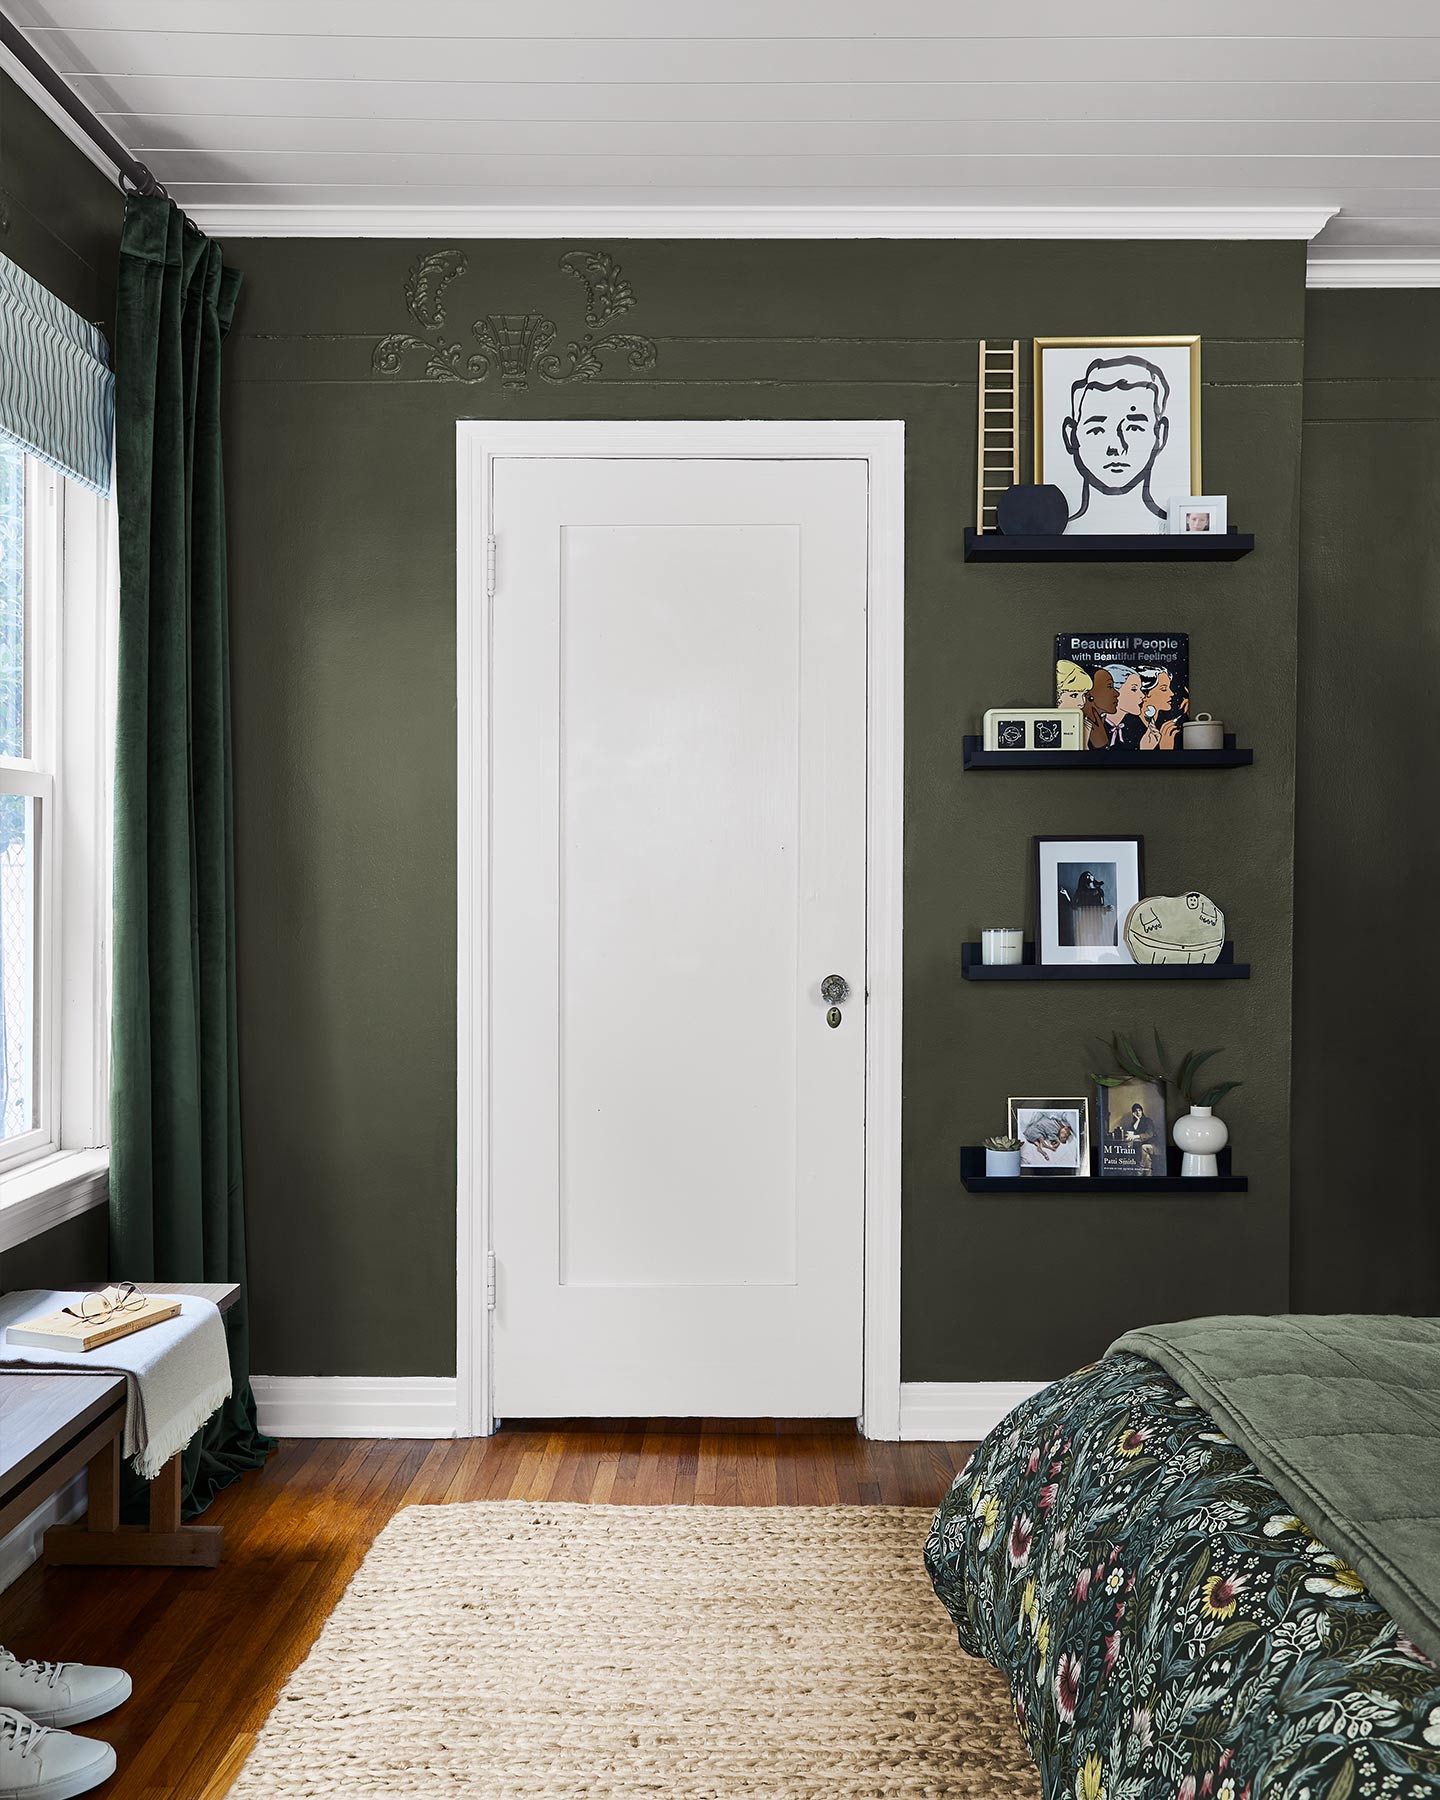 Dark drapes and black salon-style shelving are perfect complements in this dark green bedroom.